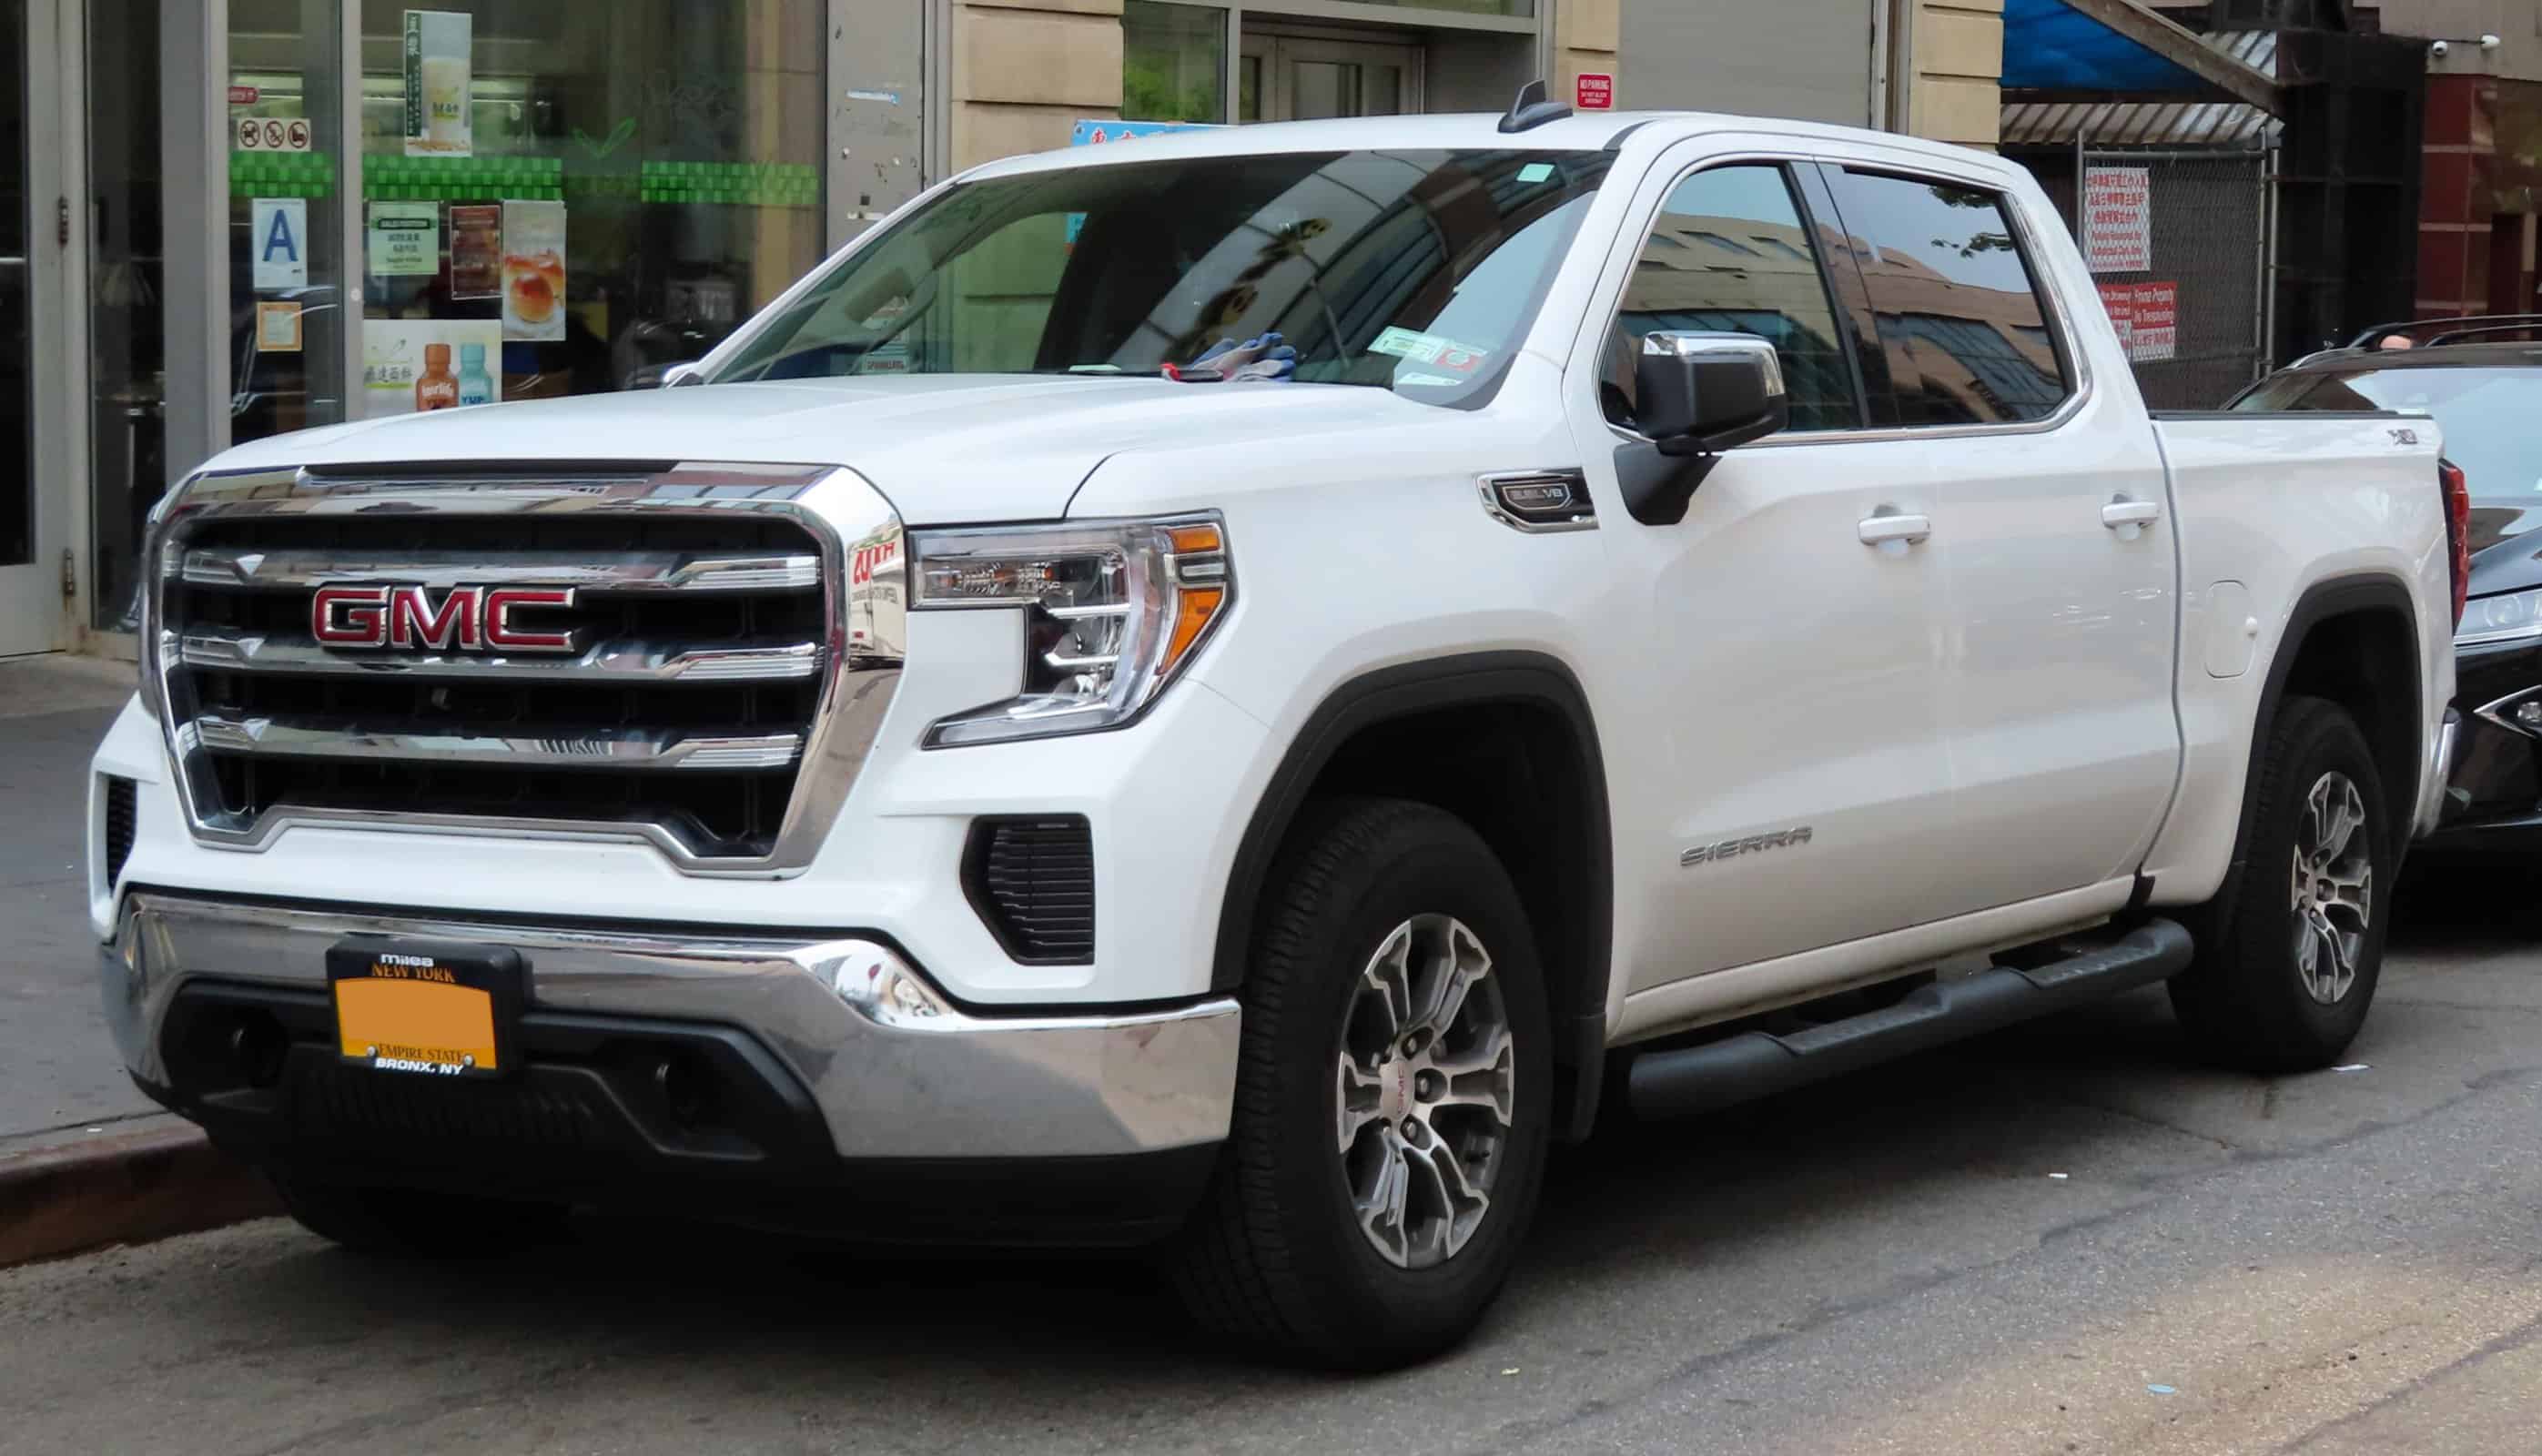 2019 GMC Sierra 1500 SLE X31 Off-Road front 5.31.19 by Kevauto